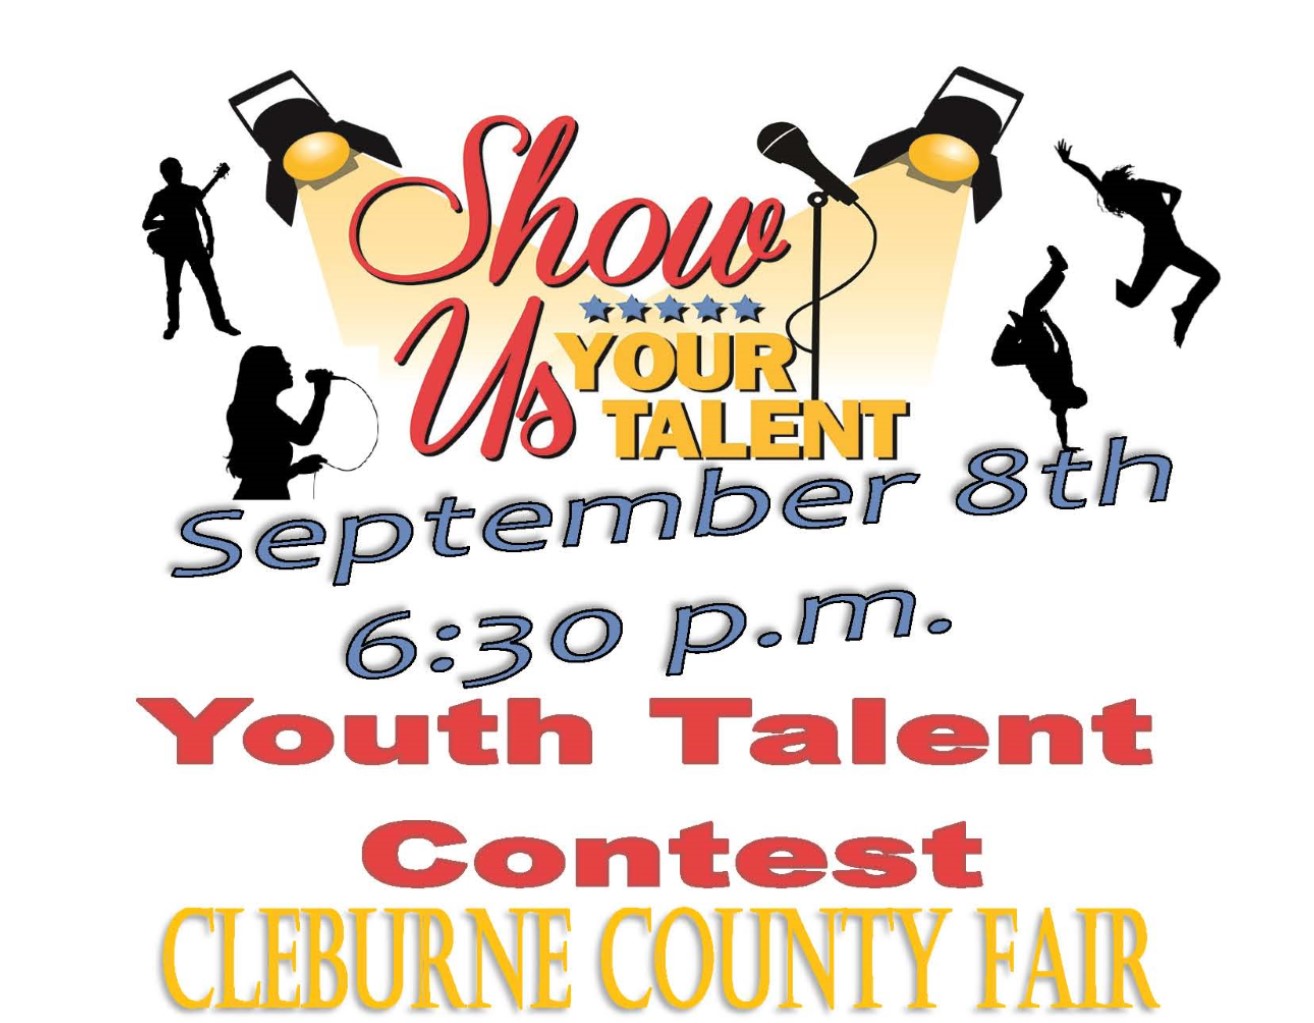 Cleburne County Fair Youth Talent Contest